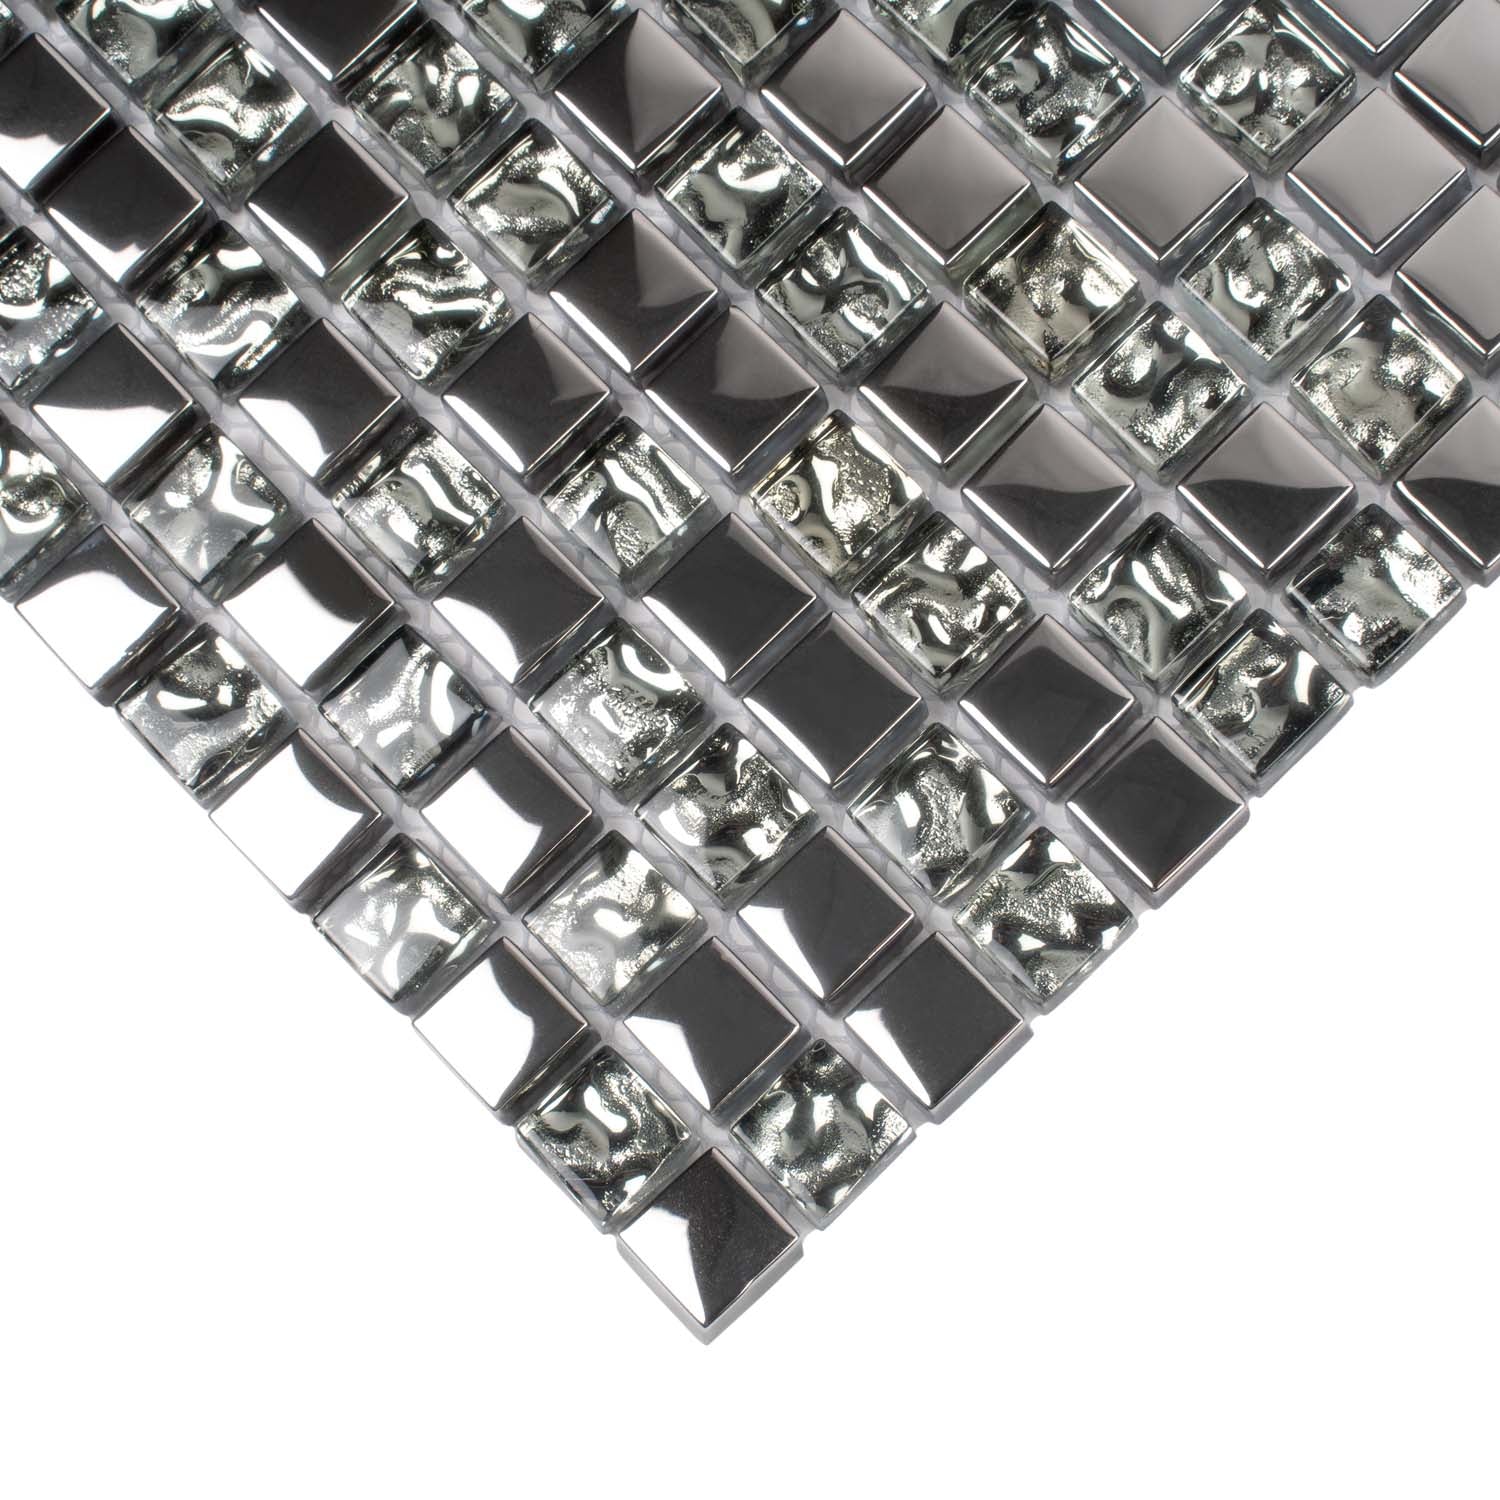 Silver and Gray Mosaic Tile